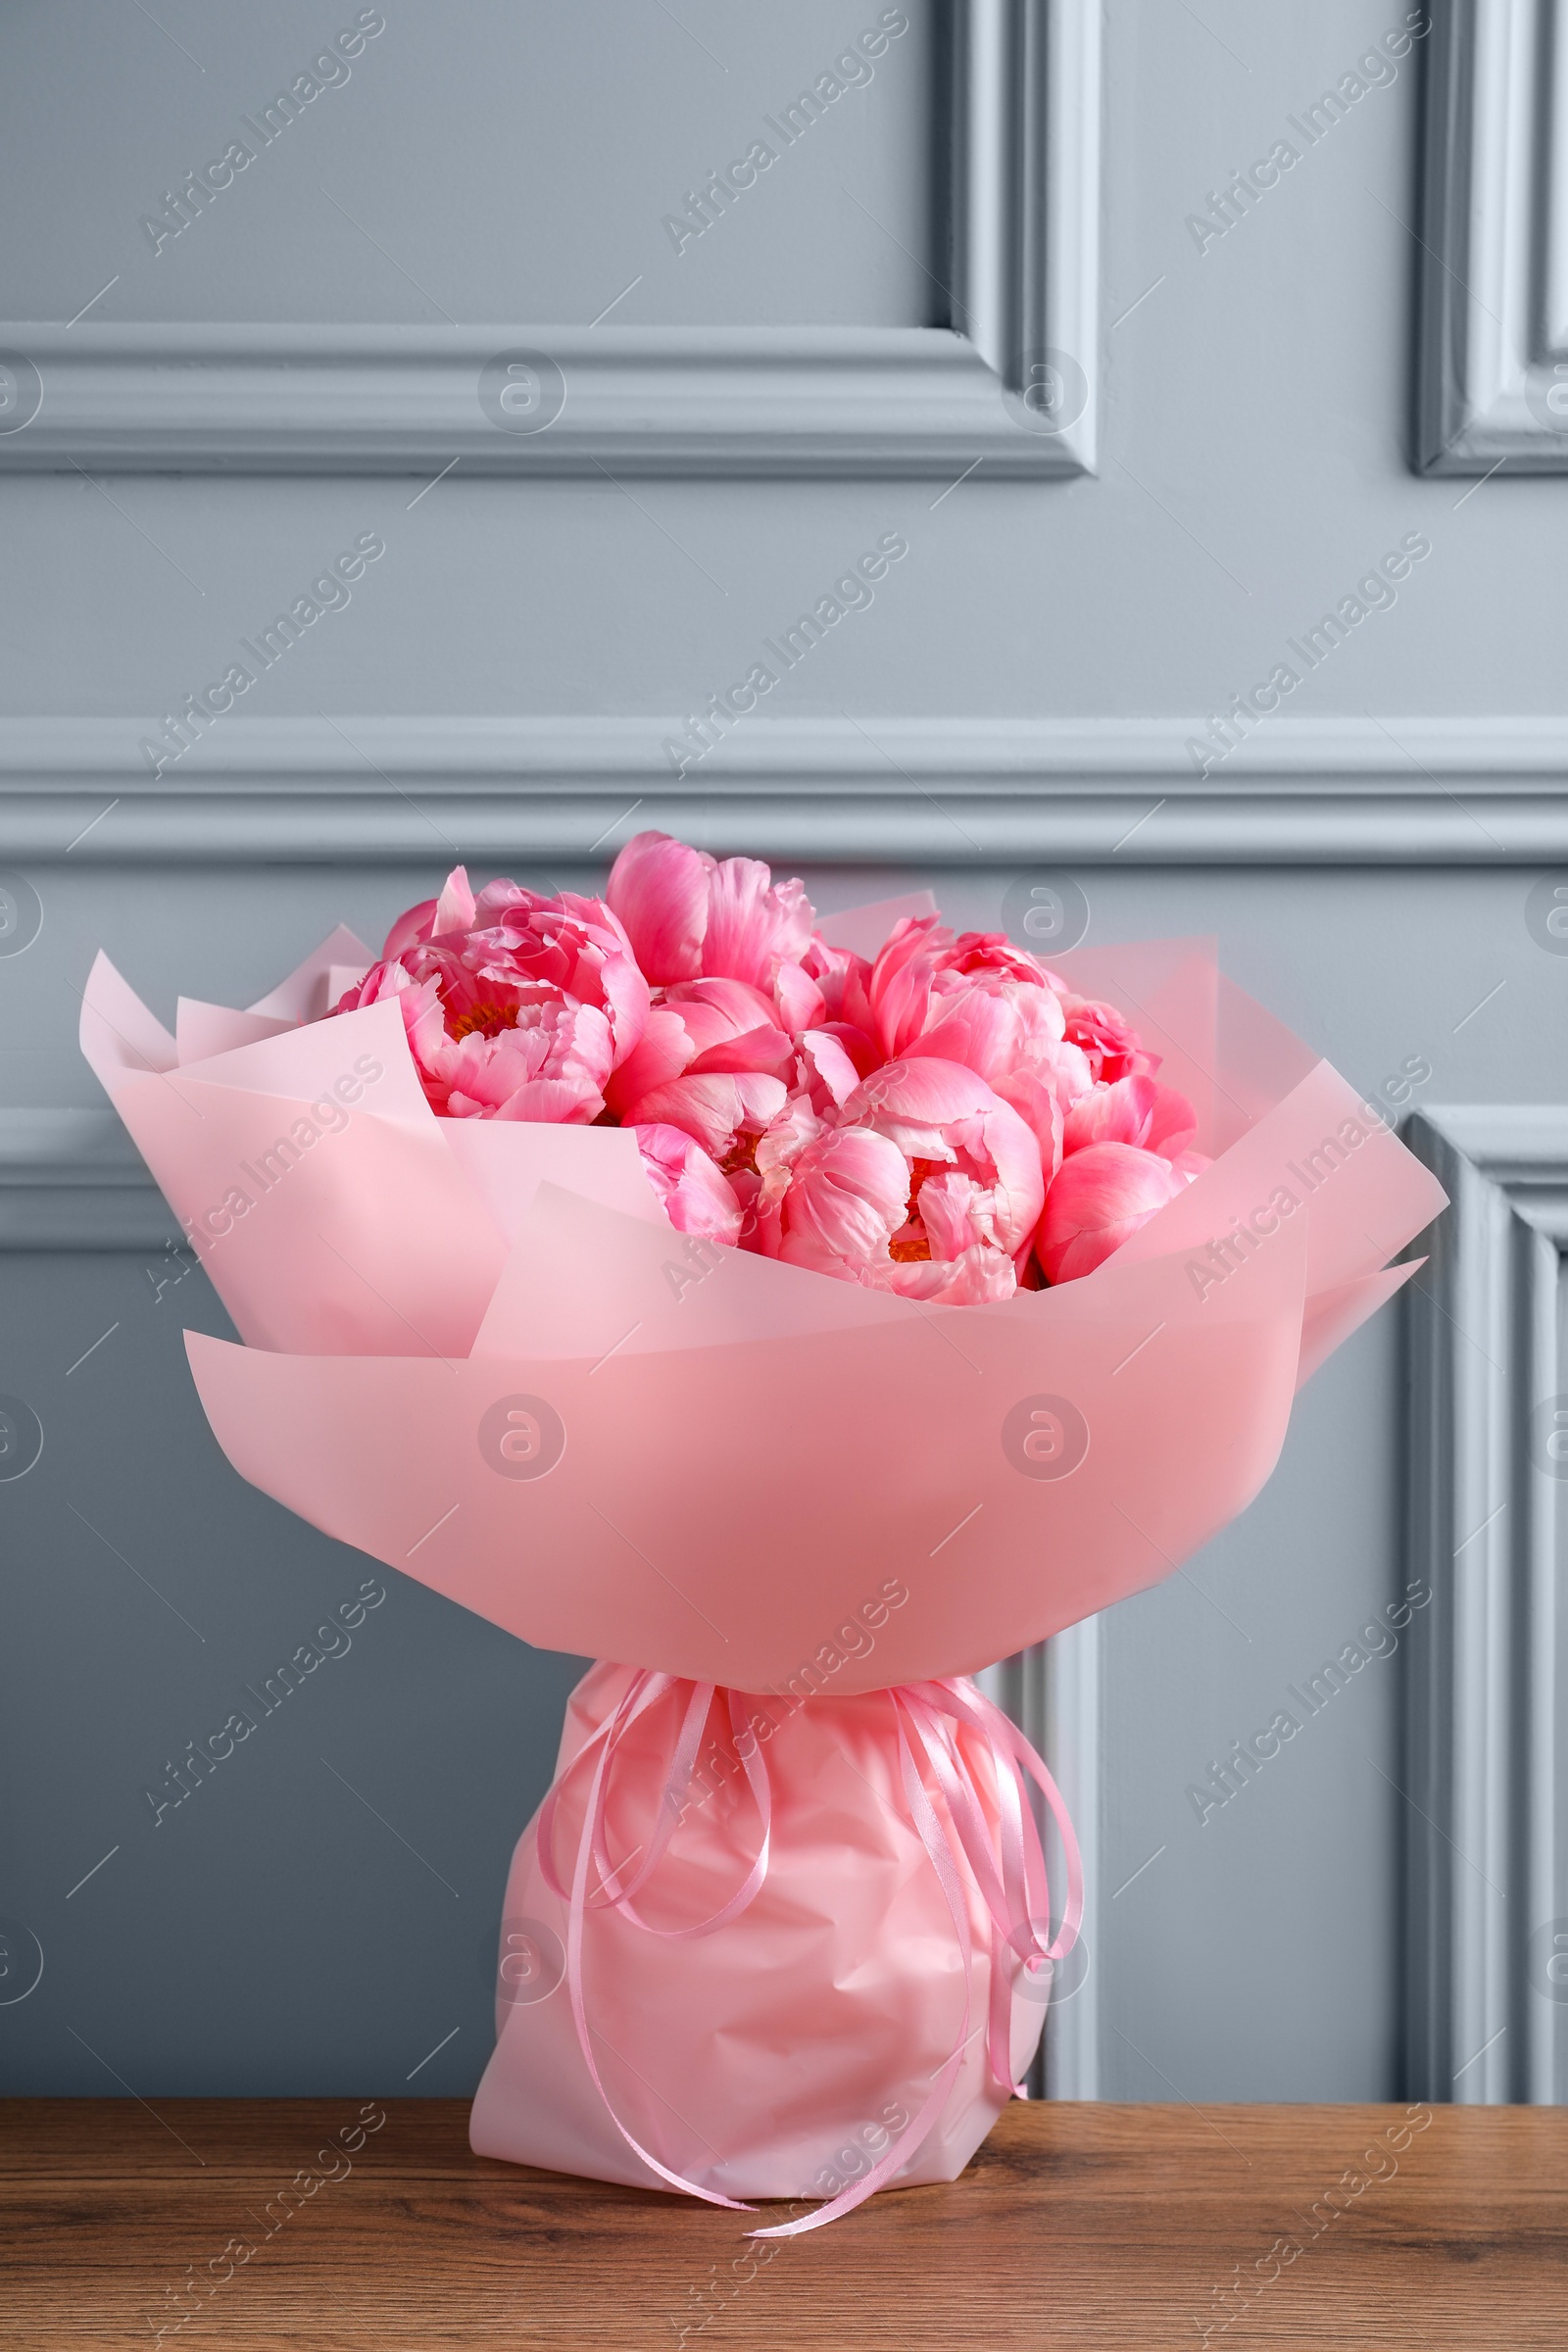 Photo of Bouquet of beautiful pink peonies on wooden table near grey wall